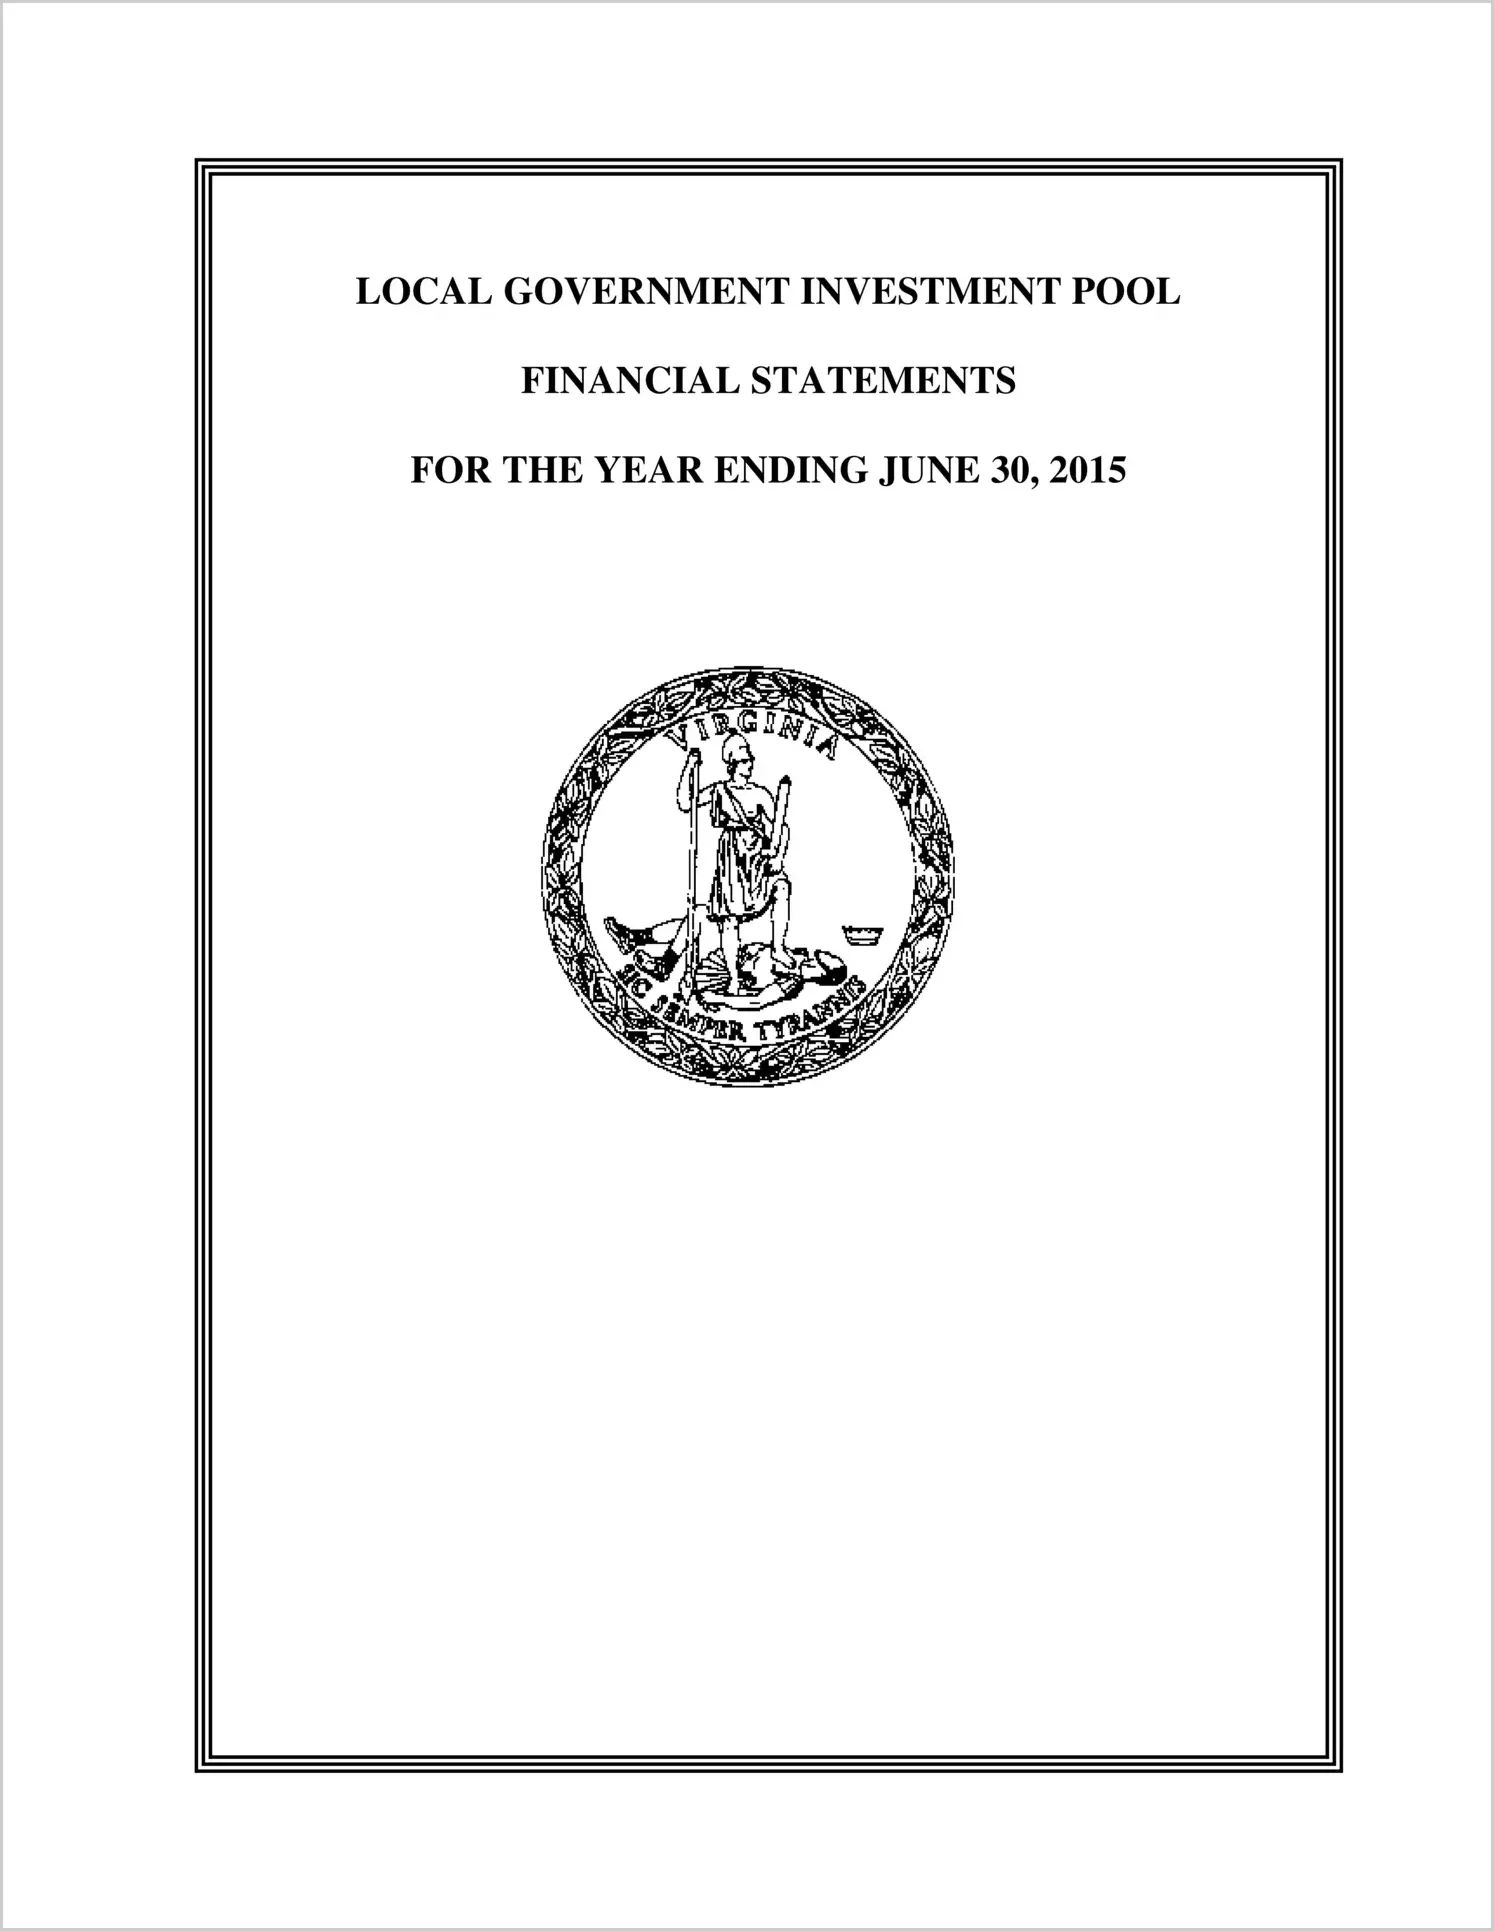 Local Government Investment Pool Financial Statements for the year ended June 30, 2015